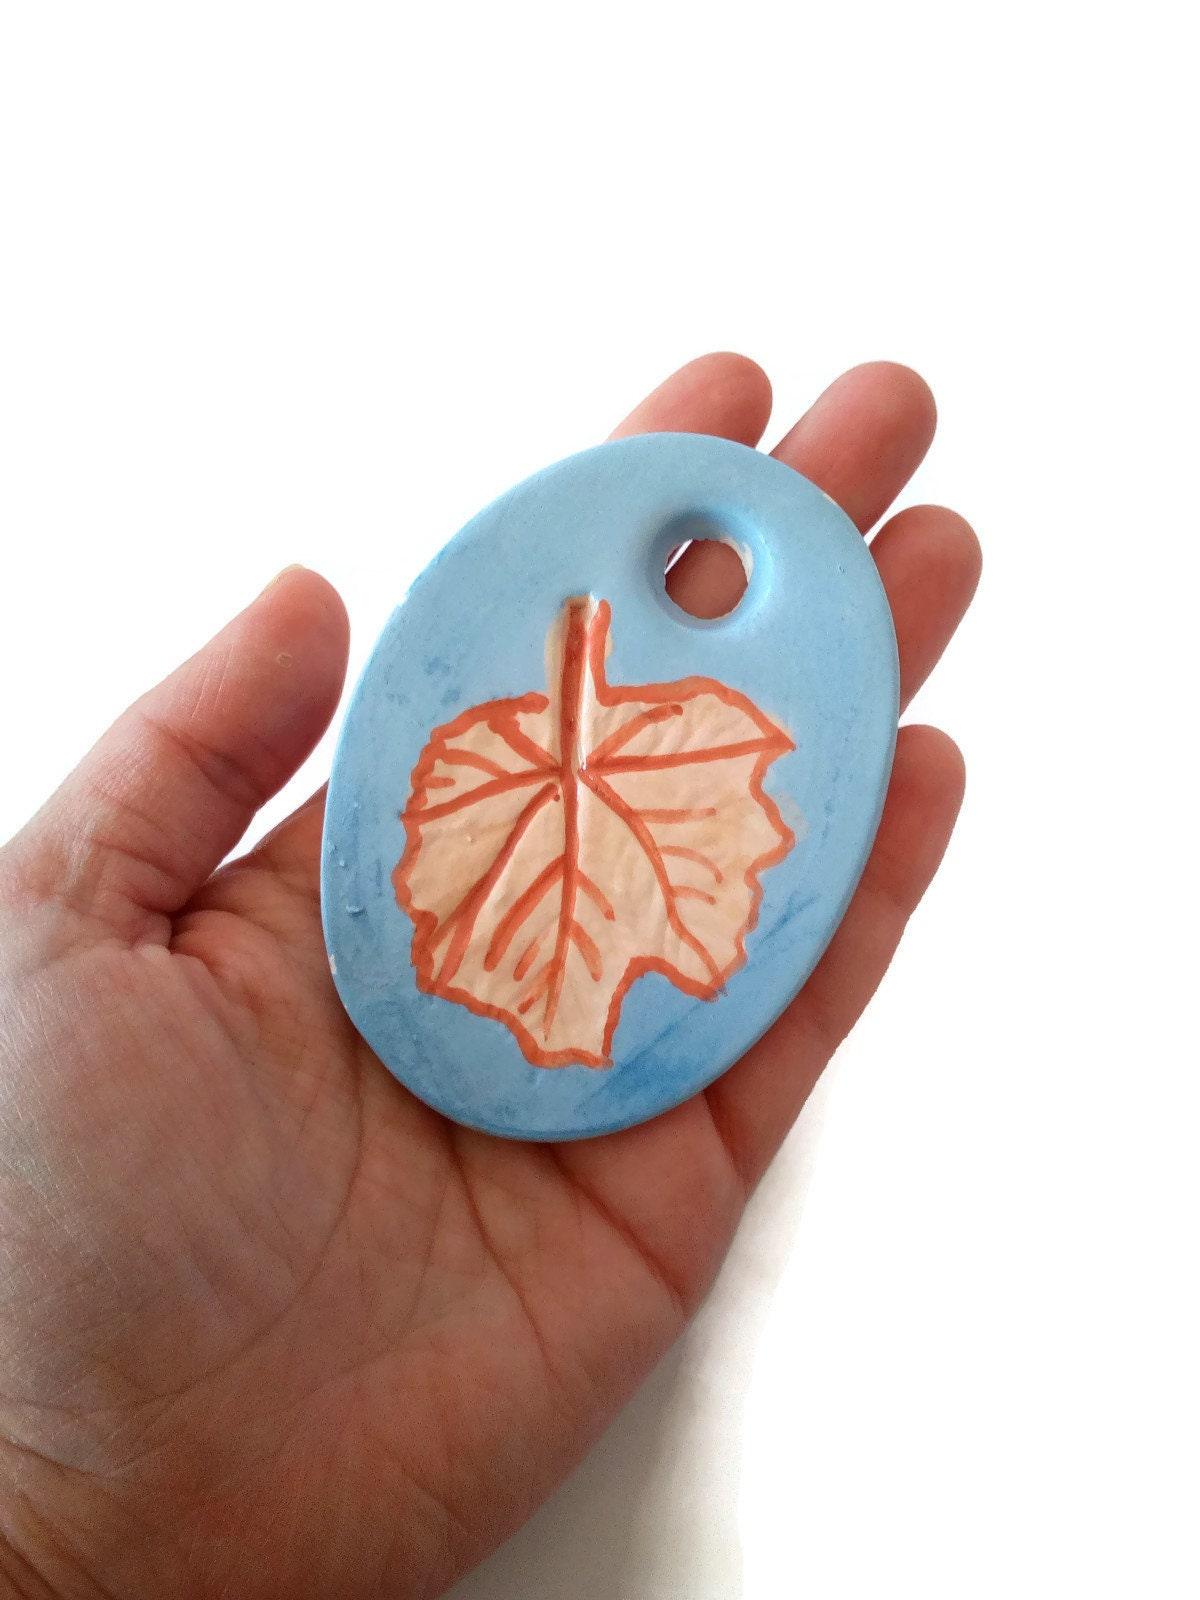 1Pc 80mm Extra Large Leaf Necklace Pendant For Jewelry Making, Handmade Ceramic Blue Oval Clay Charm For Unique Statement Jewelry - Ceramica Ana Rafael